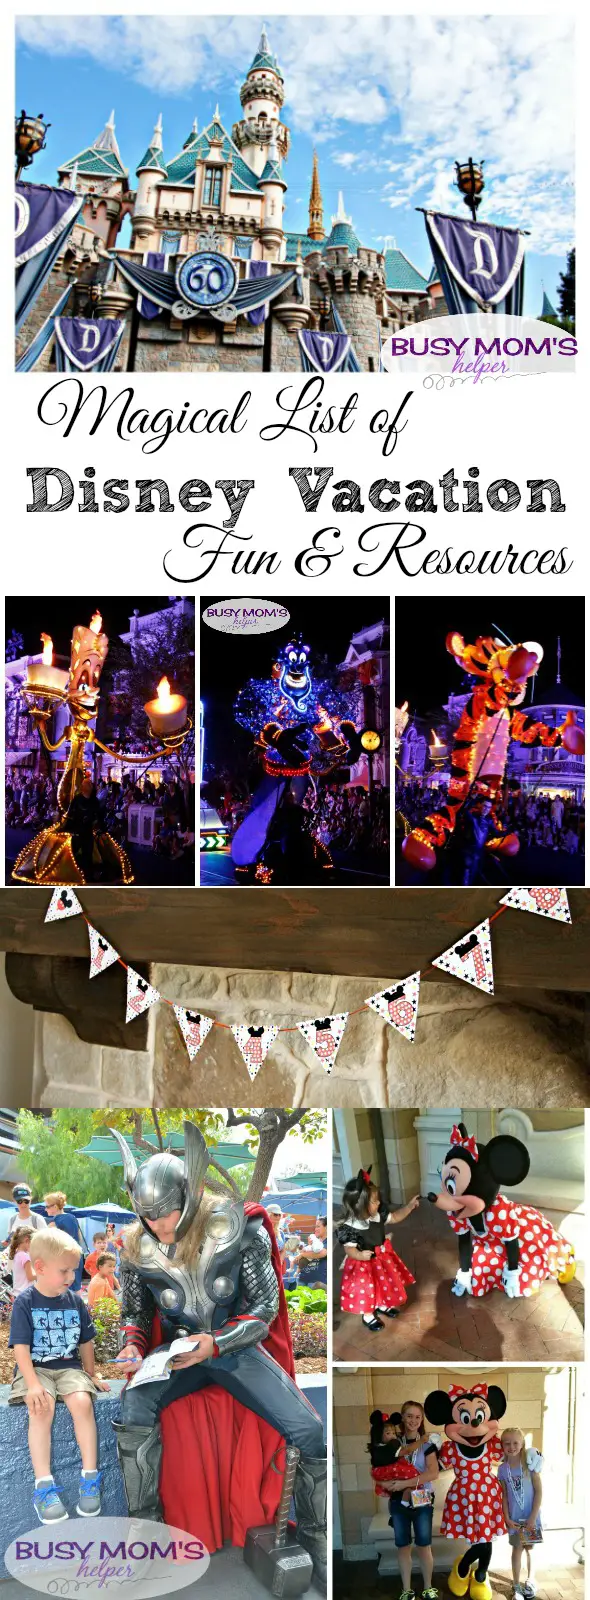 Magical List of Disney Vacation Fun & Resources / by BusyMomsHelper.com / Lots of Disney tips and recaps